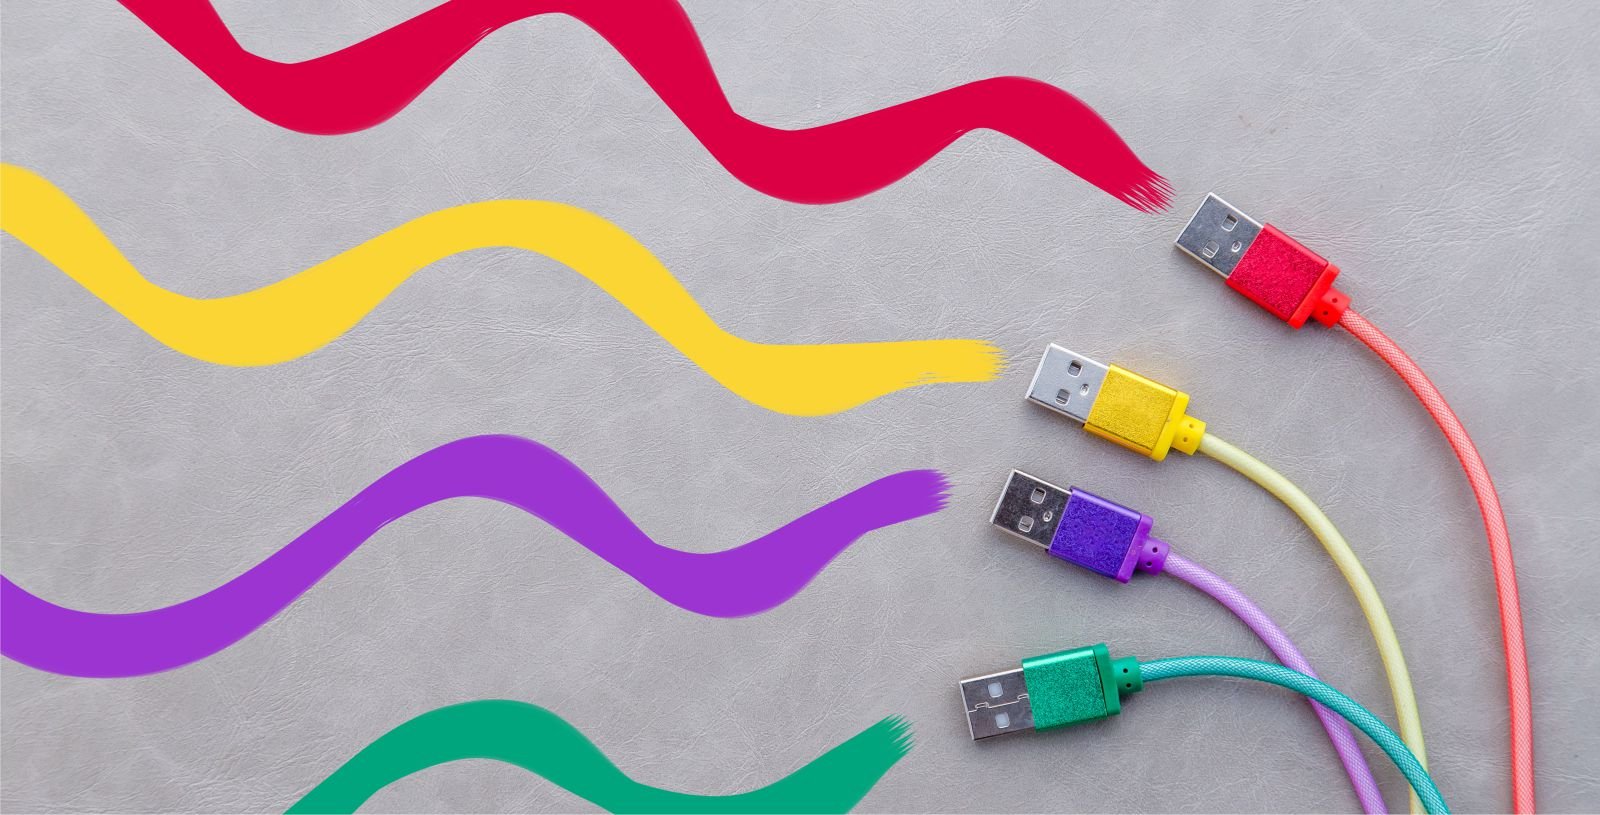 USB plugs and cables of different colors